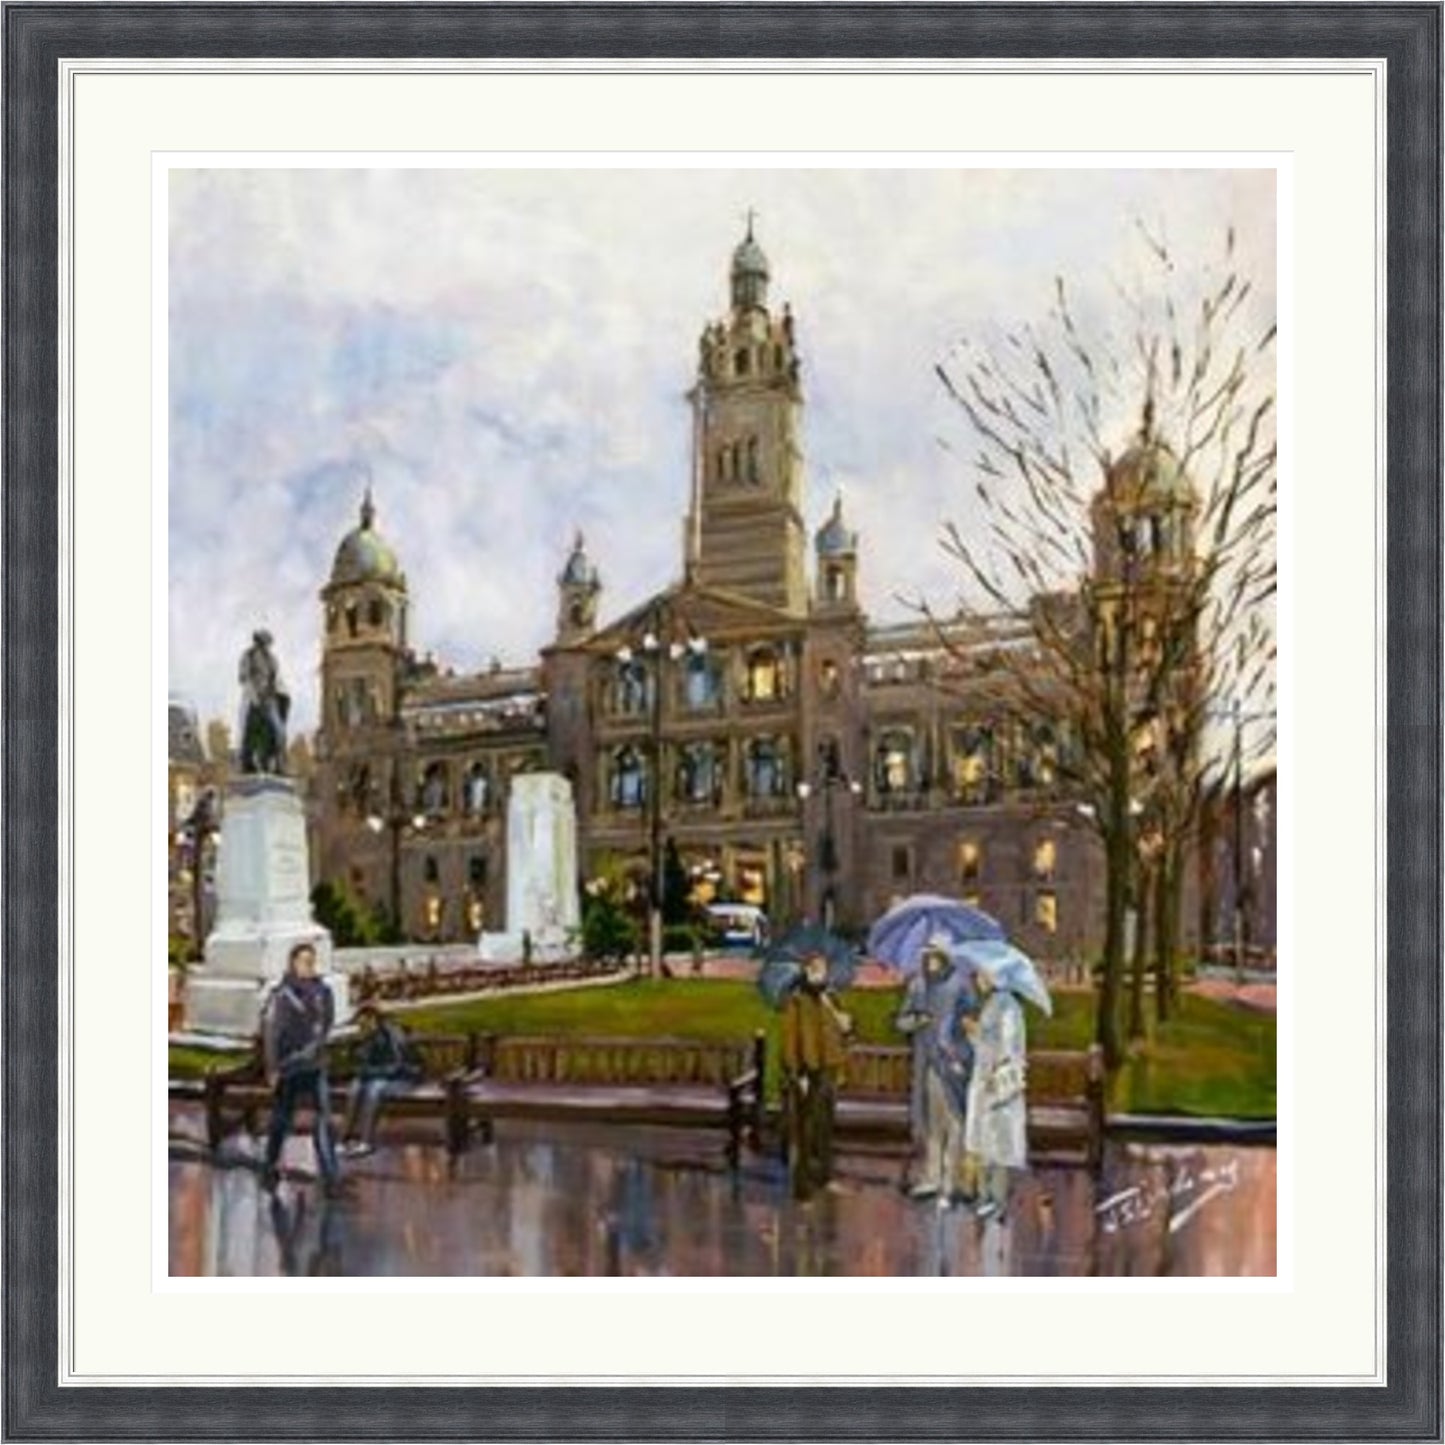 Rainy Day, George Square Glasgow by James Somerville Lindsay